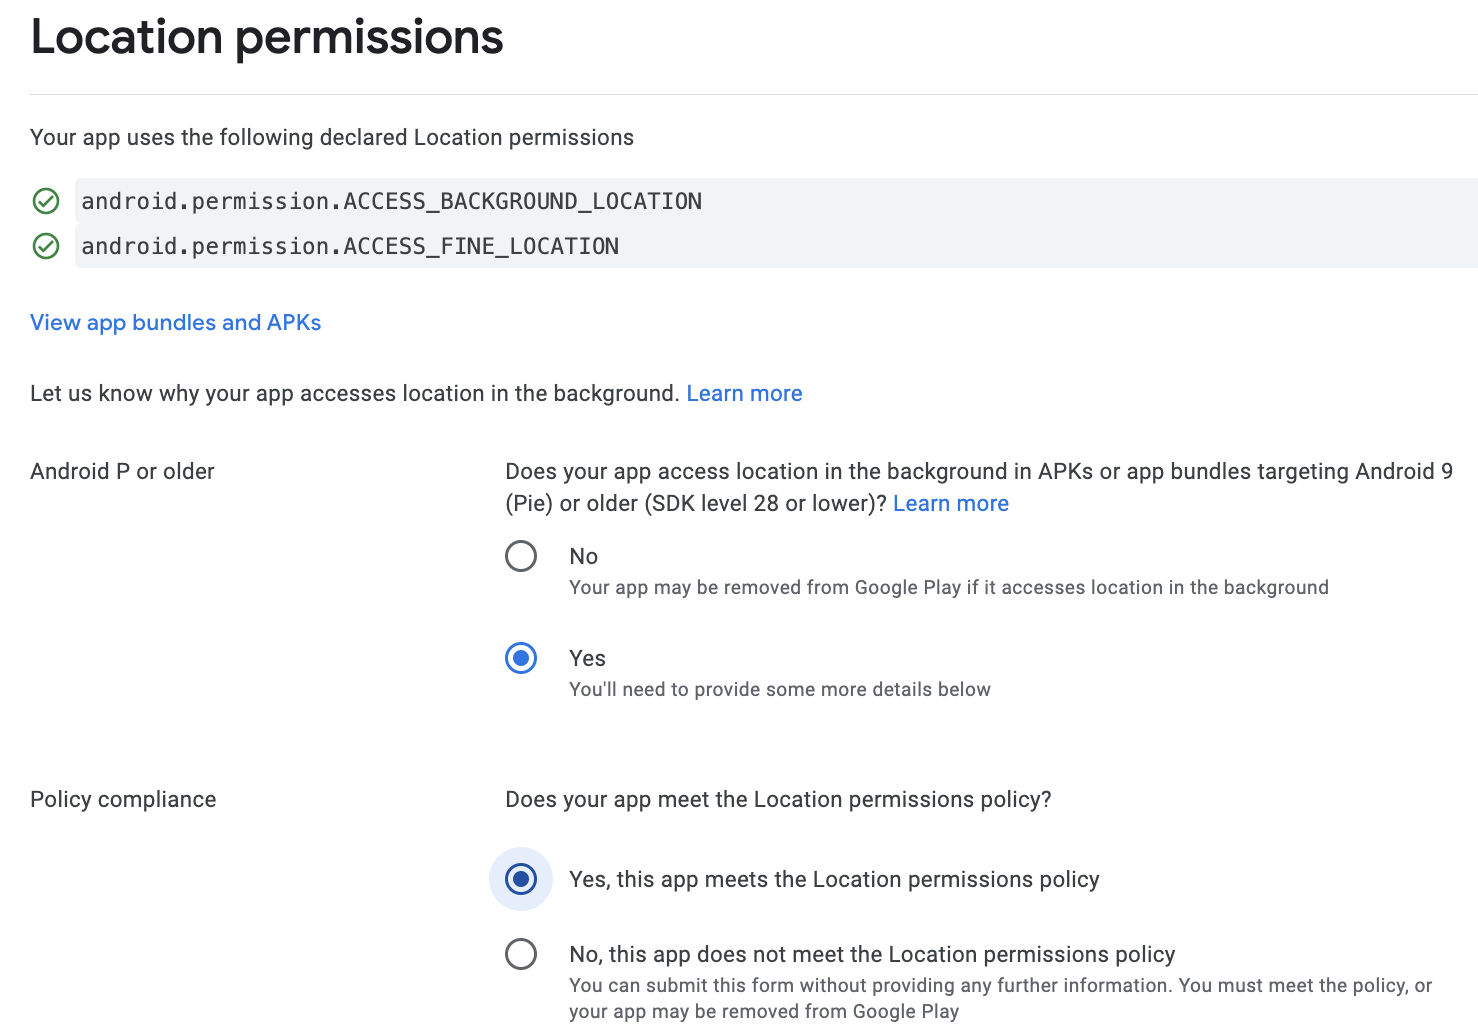 screenshot of location permissions consent in google play app-content form